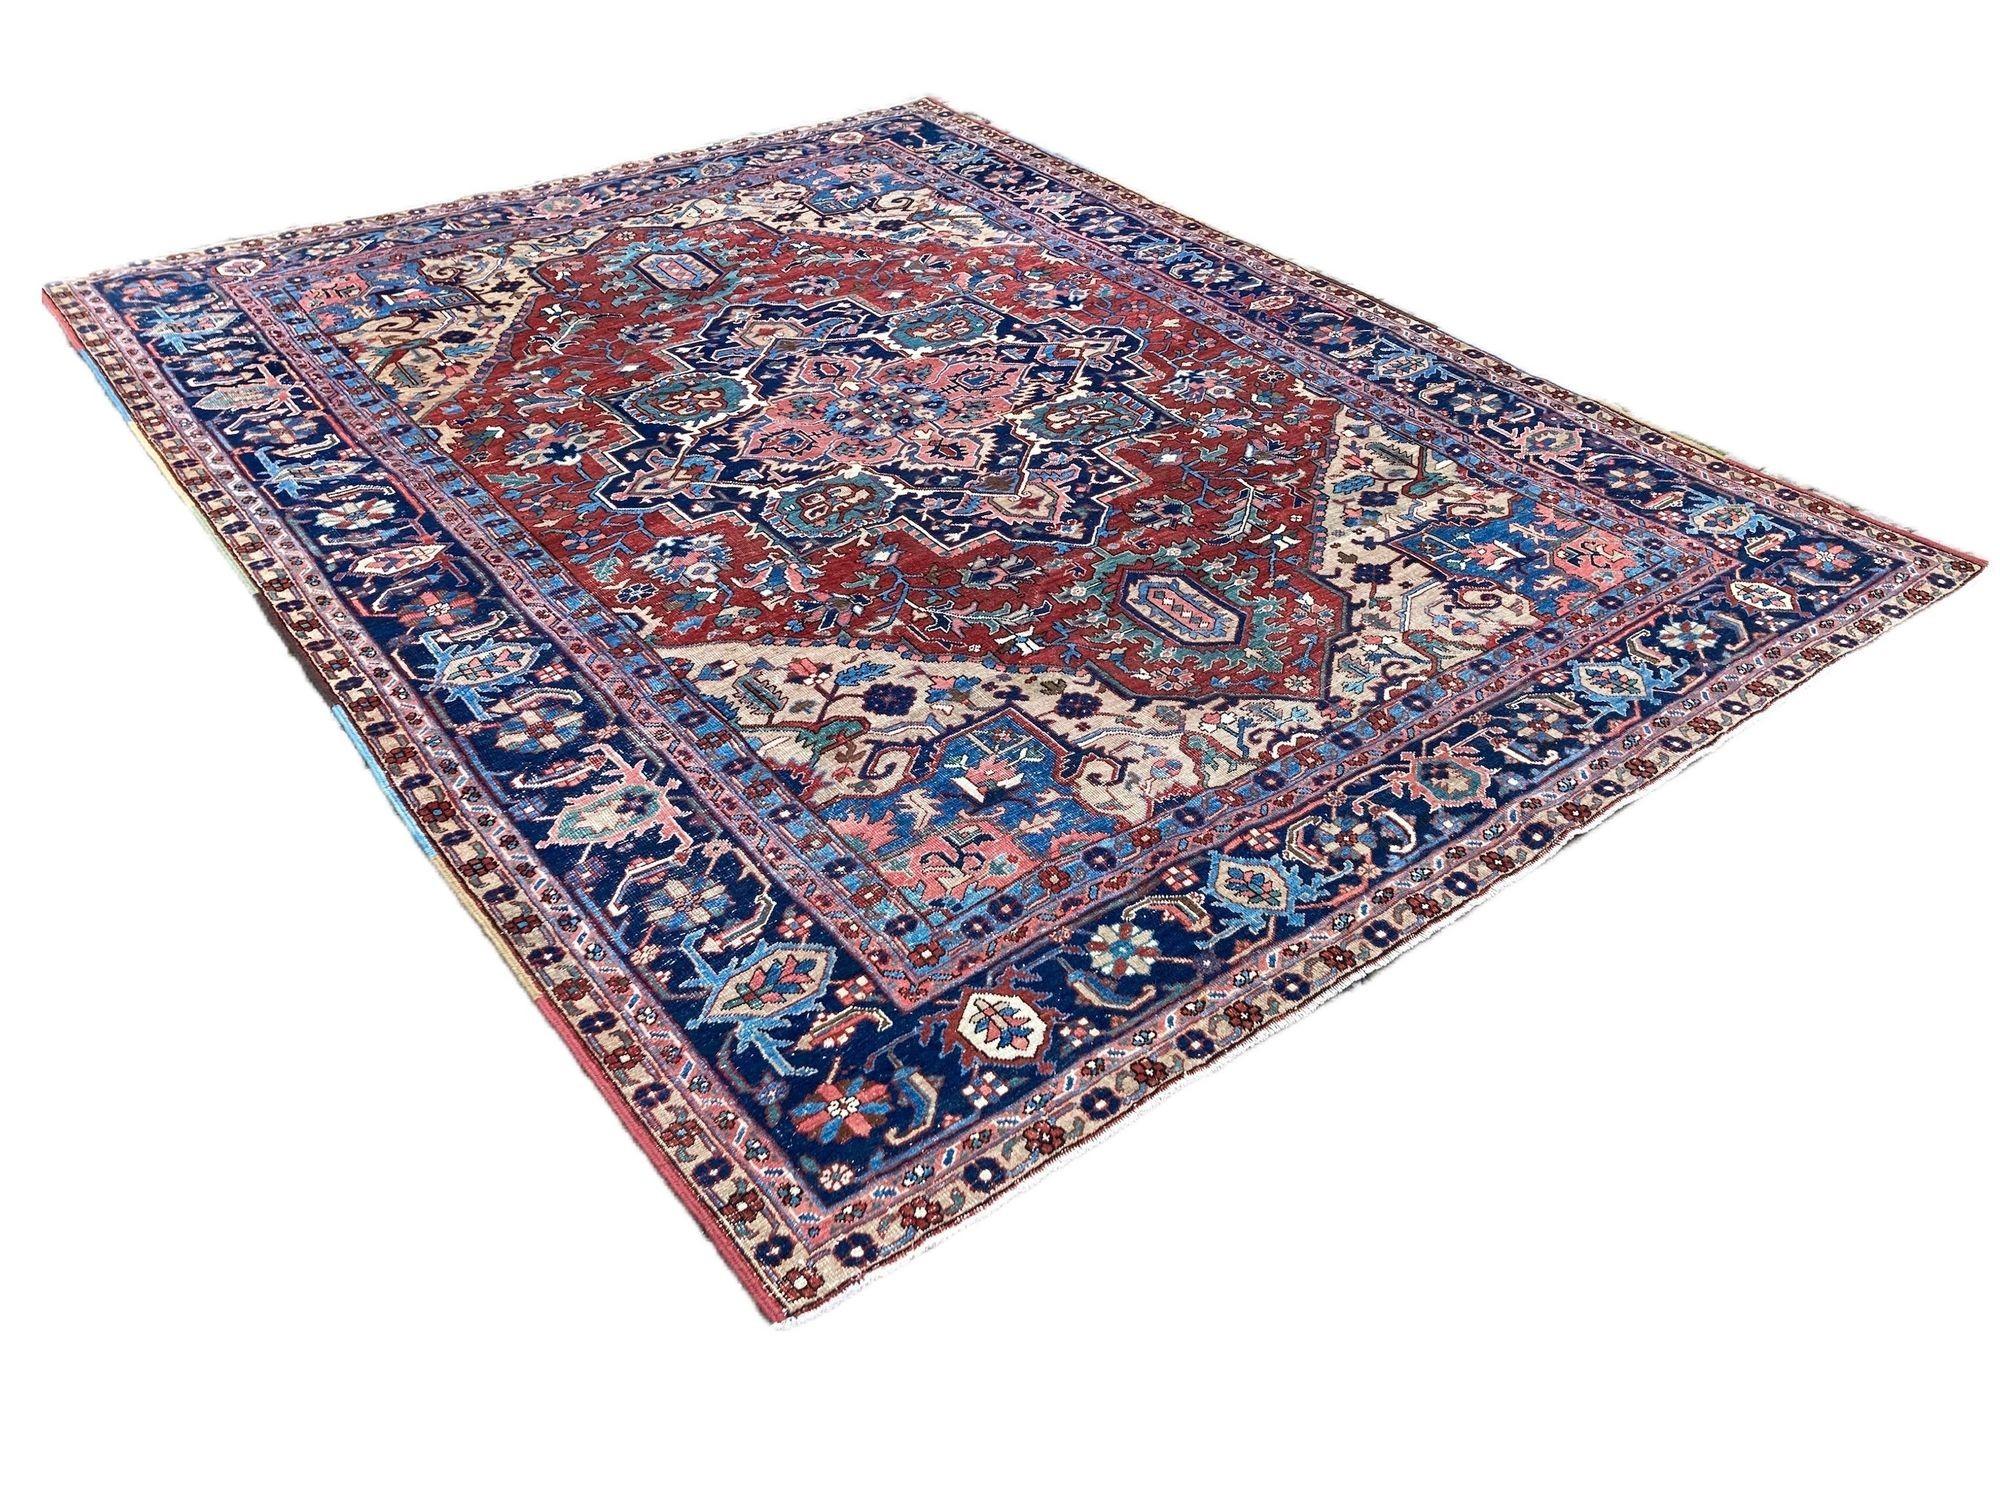 Antique Heriz Carpet 3.43m x 2.56m In Good Condition For Sale In St. Albans, GB